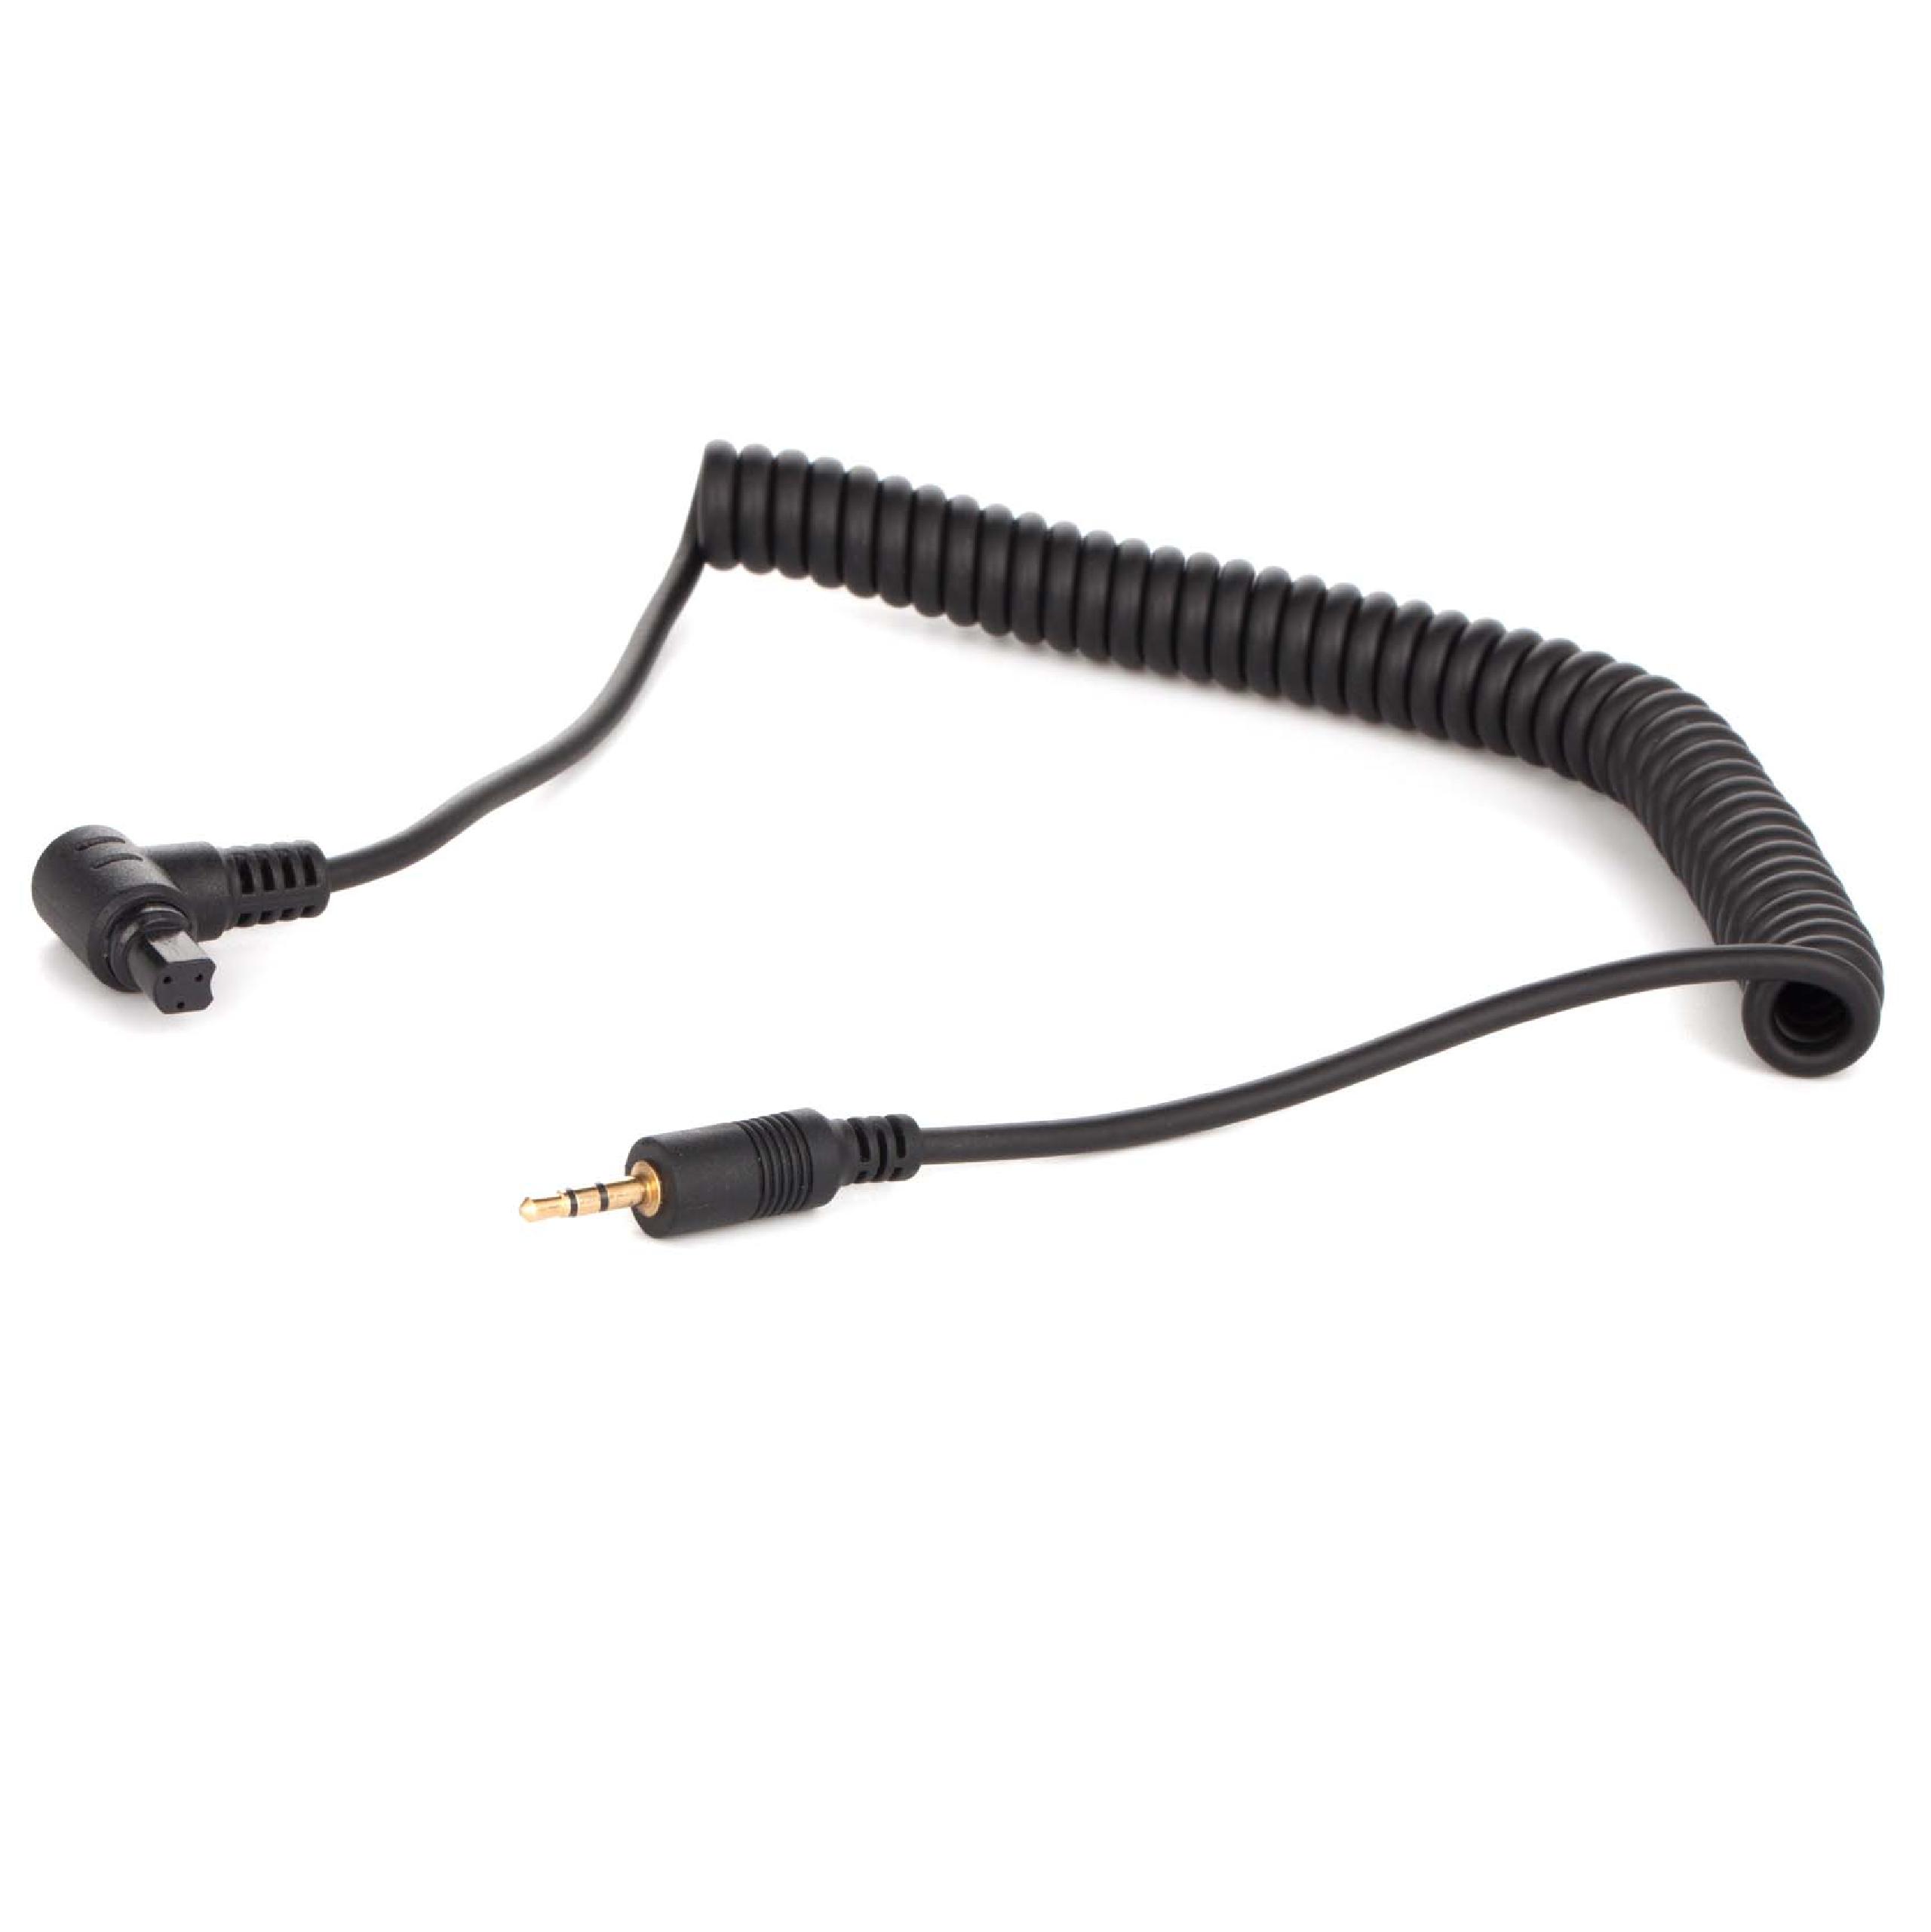 Cable for Shutter Release suitable for Canon EOS 80D Camera - 107 cm